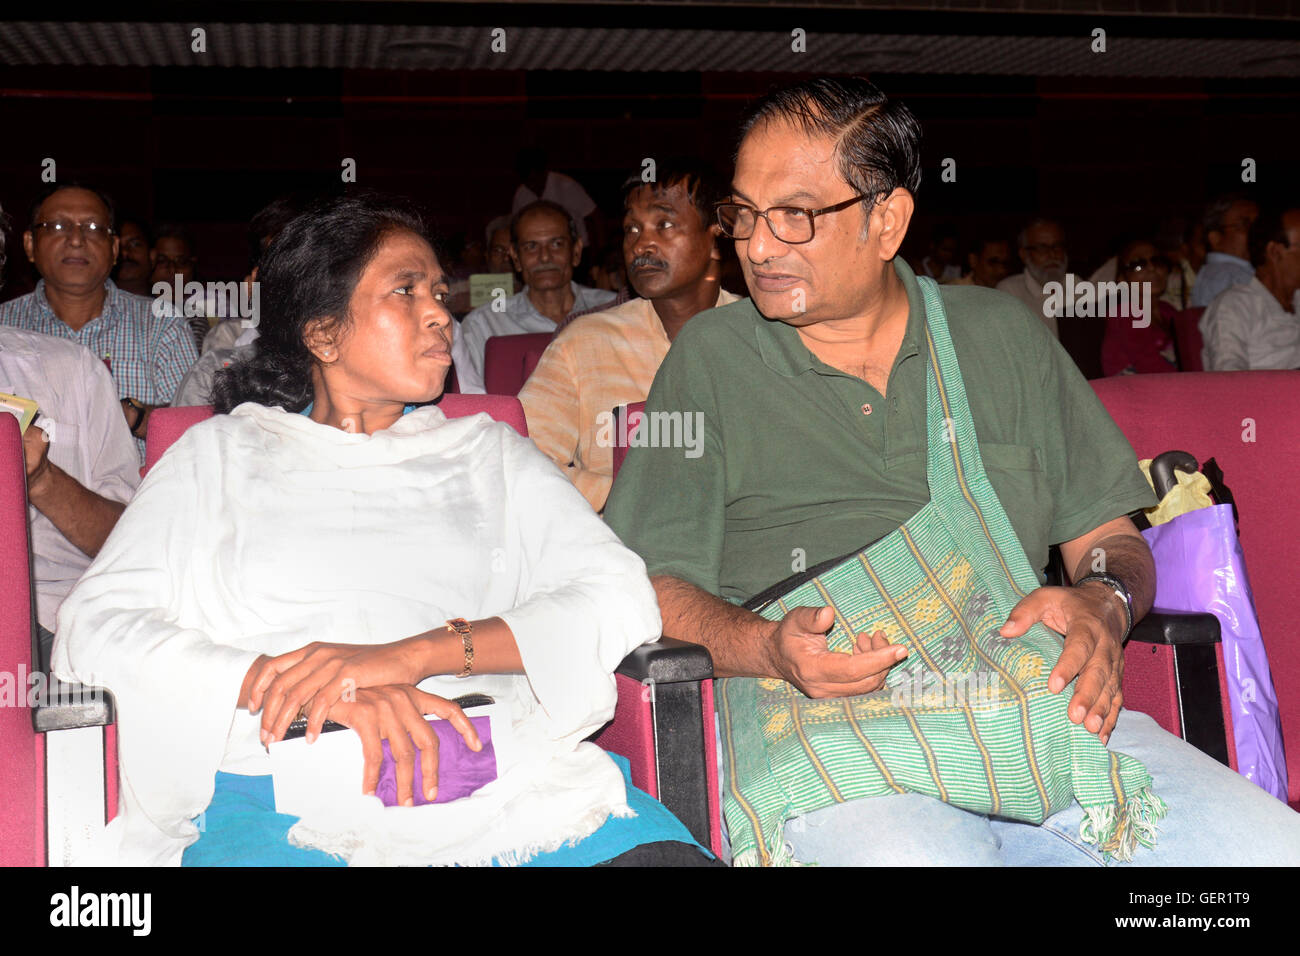 Dr. Binayak Sen doctor and social activist (R) with Soni Sori (L) during the program. Soni Sori social movement activist from Chhattisgarh discuss the condition of tribal people in Bastar during the memorial lecture of Prof. Abhee Dutta Mazumder organized by Forum against Monopolistic Aggression (India) in Kolkata. This year subject of lecture is 'Corporatocracy Versus People's Resistance'. Suvojit Bagchi, Chief of Bureau, The Hindu, Kolkata and Avra Chakroborty, Science Activist are other two panelist in this lecture. (Photo by Saikat Paul/Pacific Press) Stock Photo